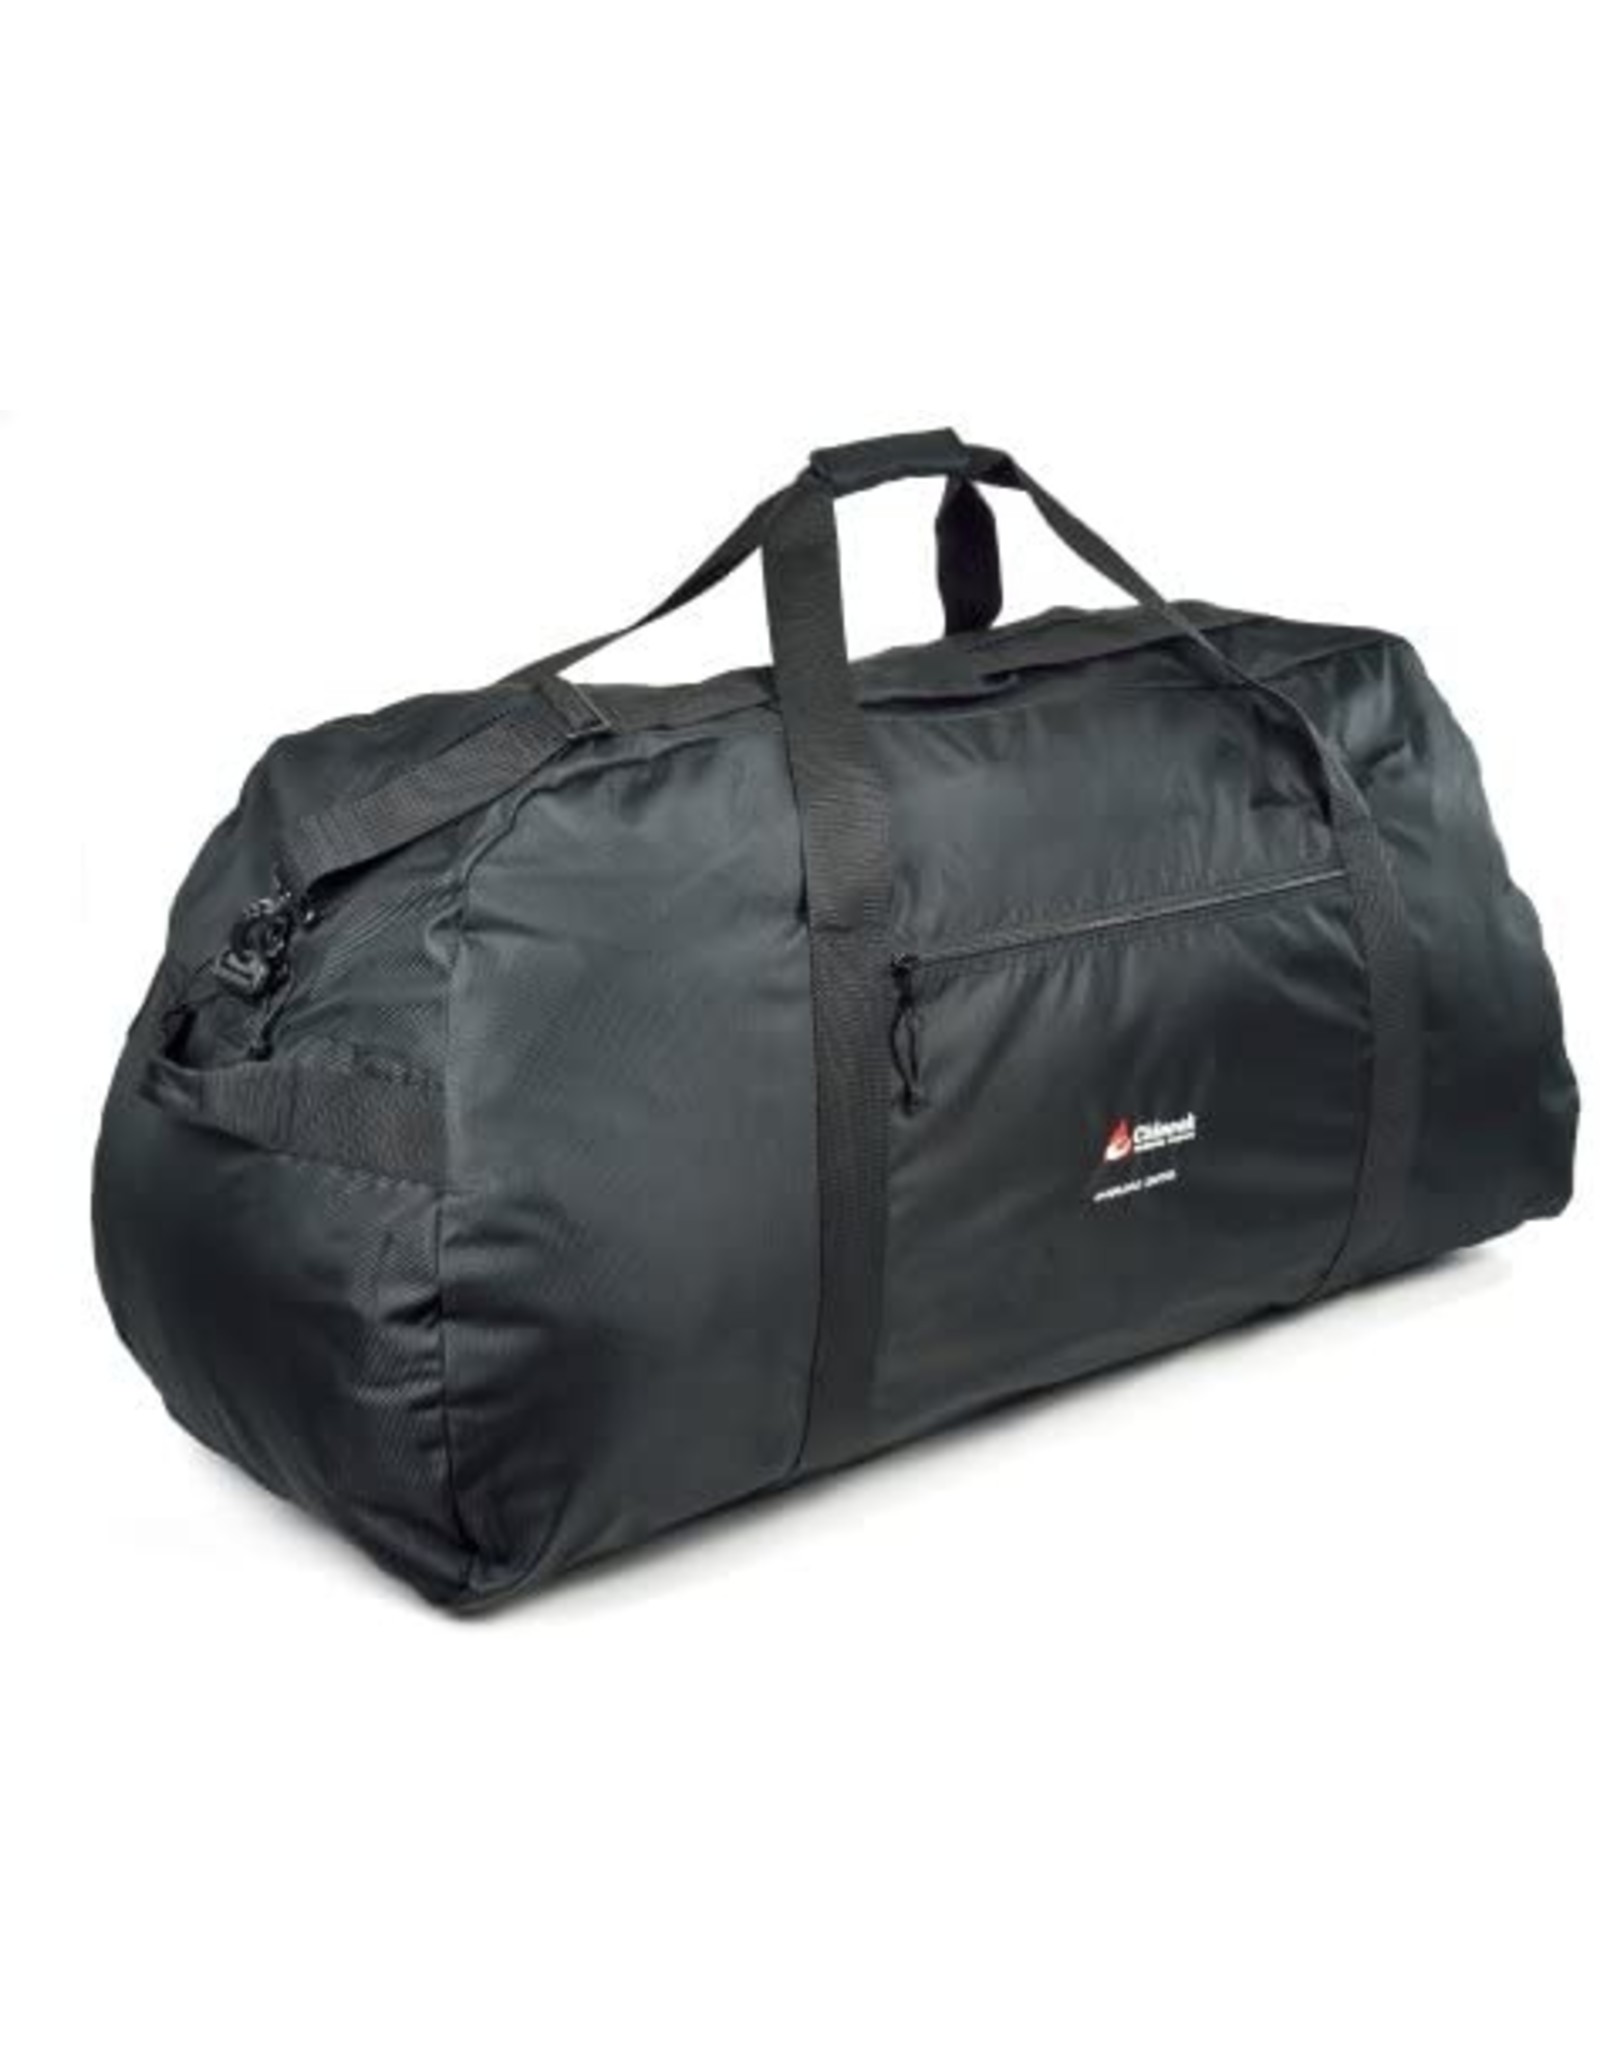 CHINOOK TECHNICAL OUTDOOR CHINOOK OVERLOAD DUFFEL BAG - 21"